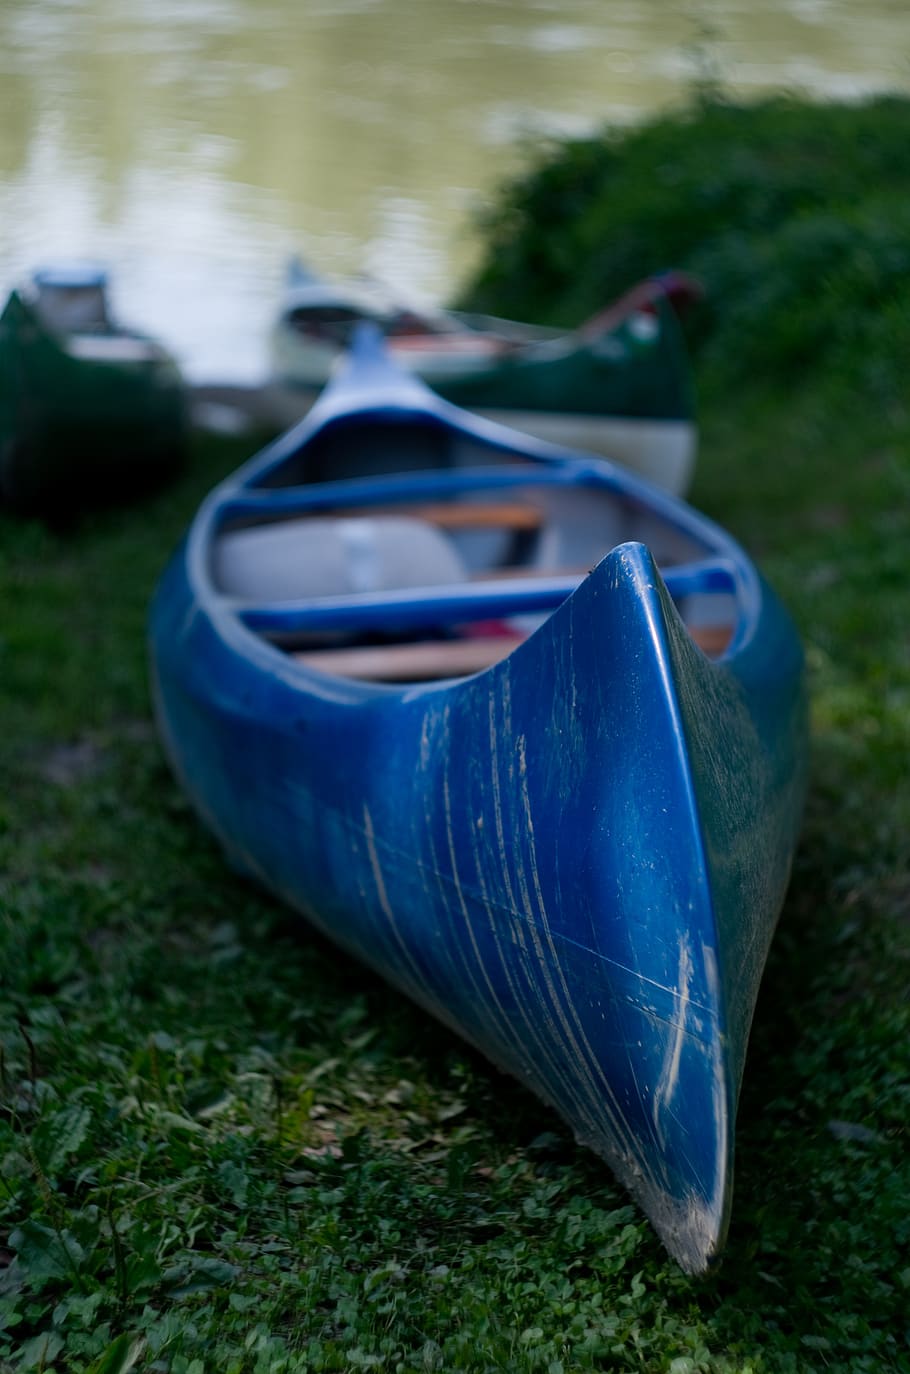 river, part, canoeing, blue, grass, nature, plant, day, land, water